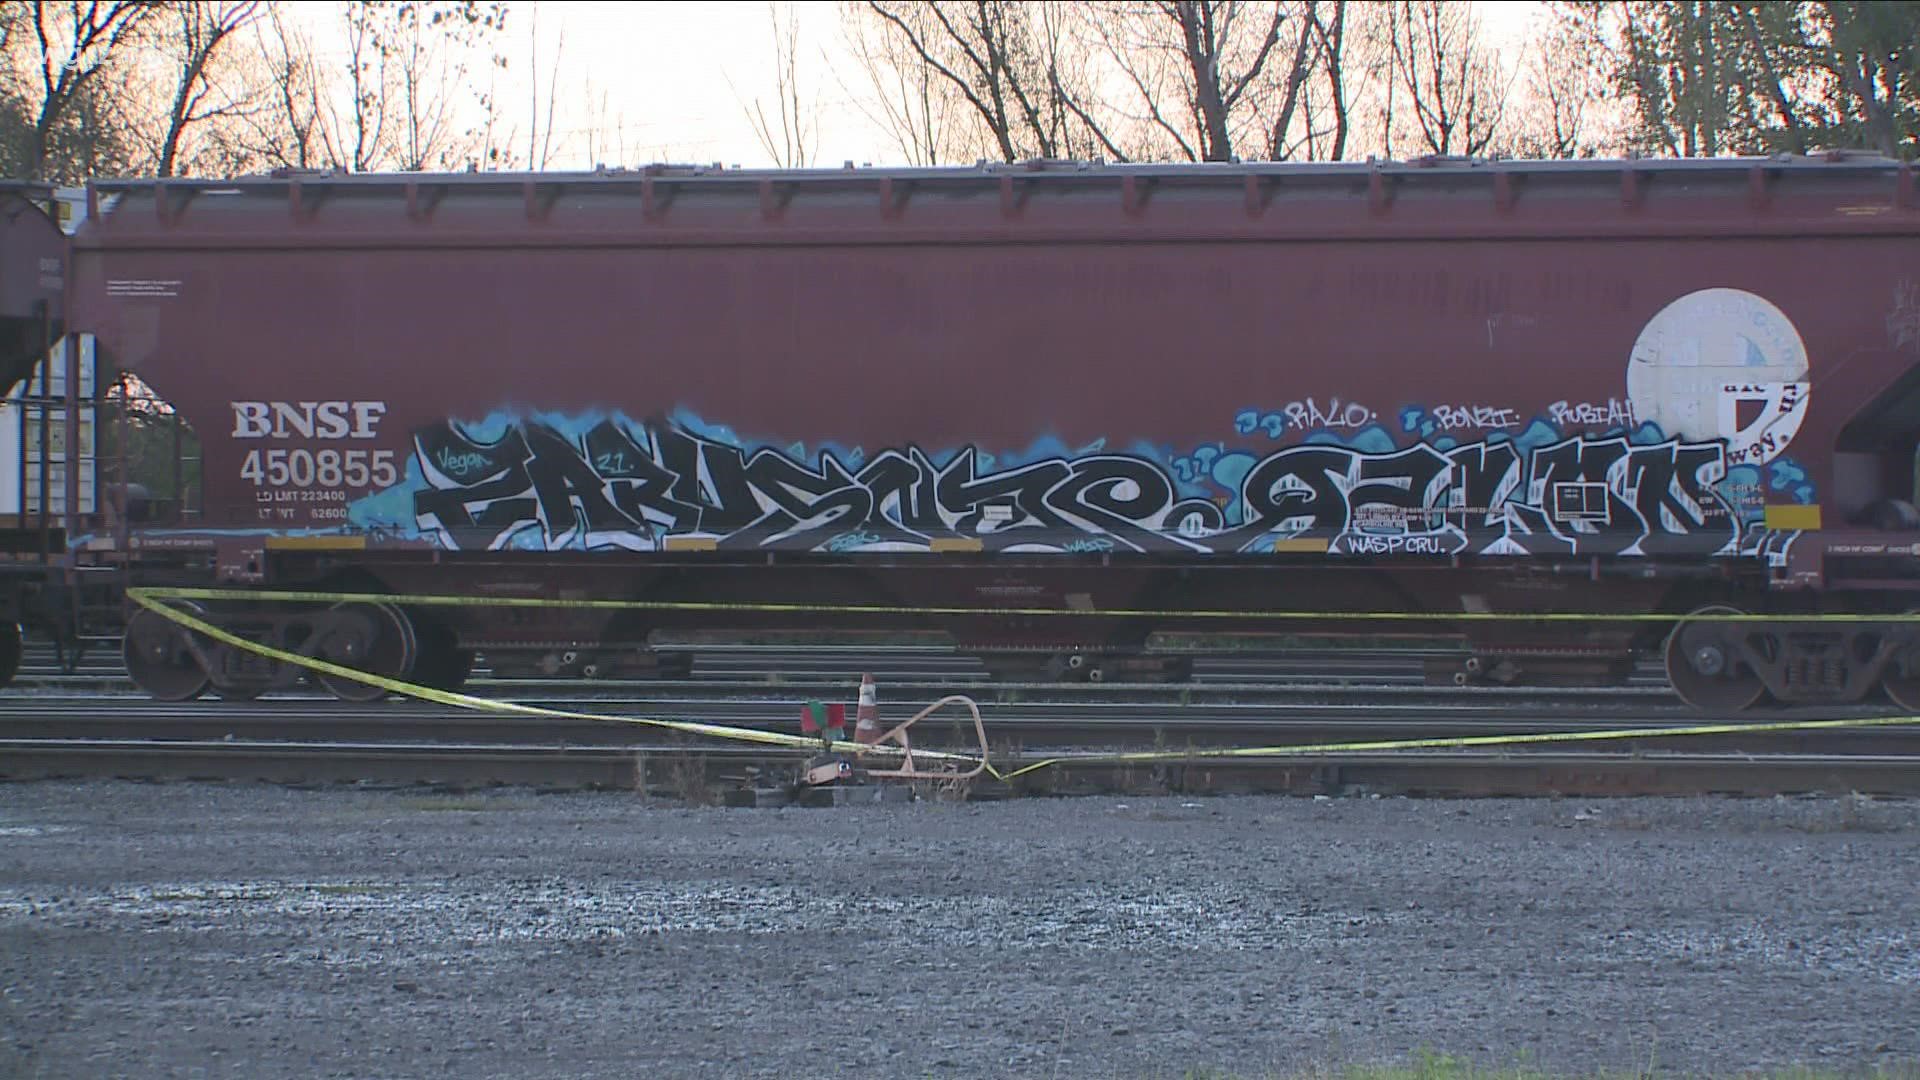 Police say a train was heading west when it hit the Elma man from behind... turning him around and causing his arm to get caught.